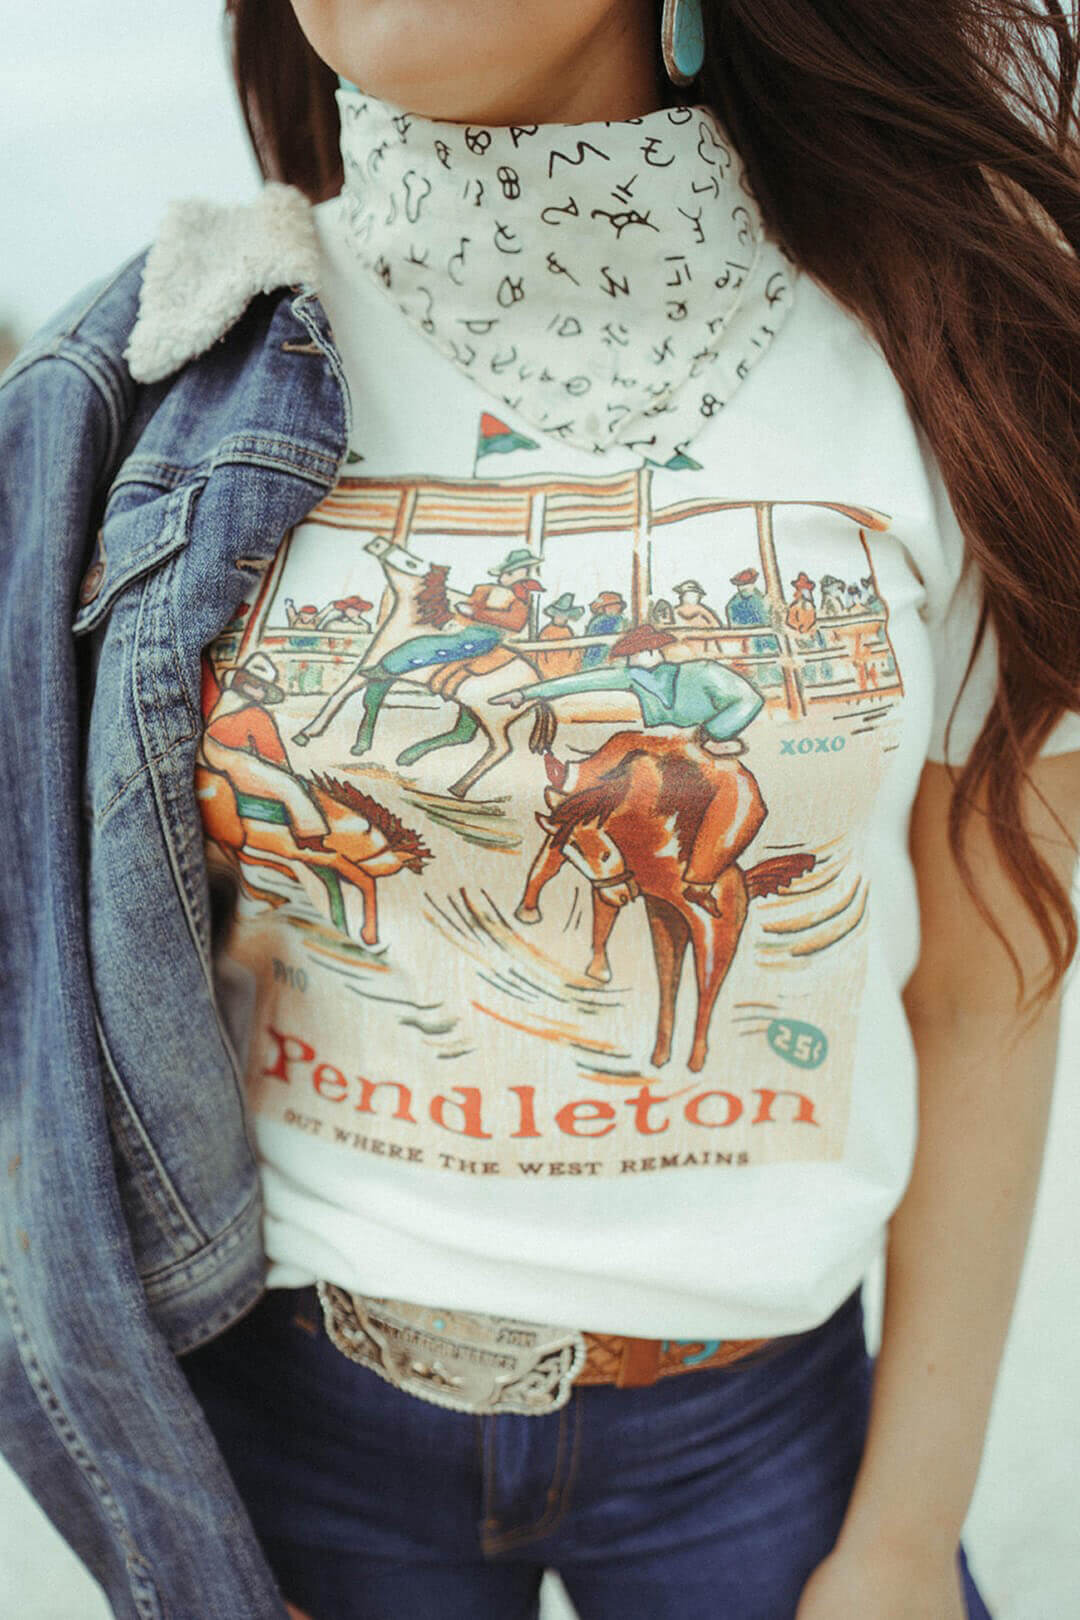 Close up image of the XOXO brand company tee "Out Where The West Remains" Pendleton  tee of image of rodeo with bucking broncs.